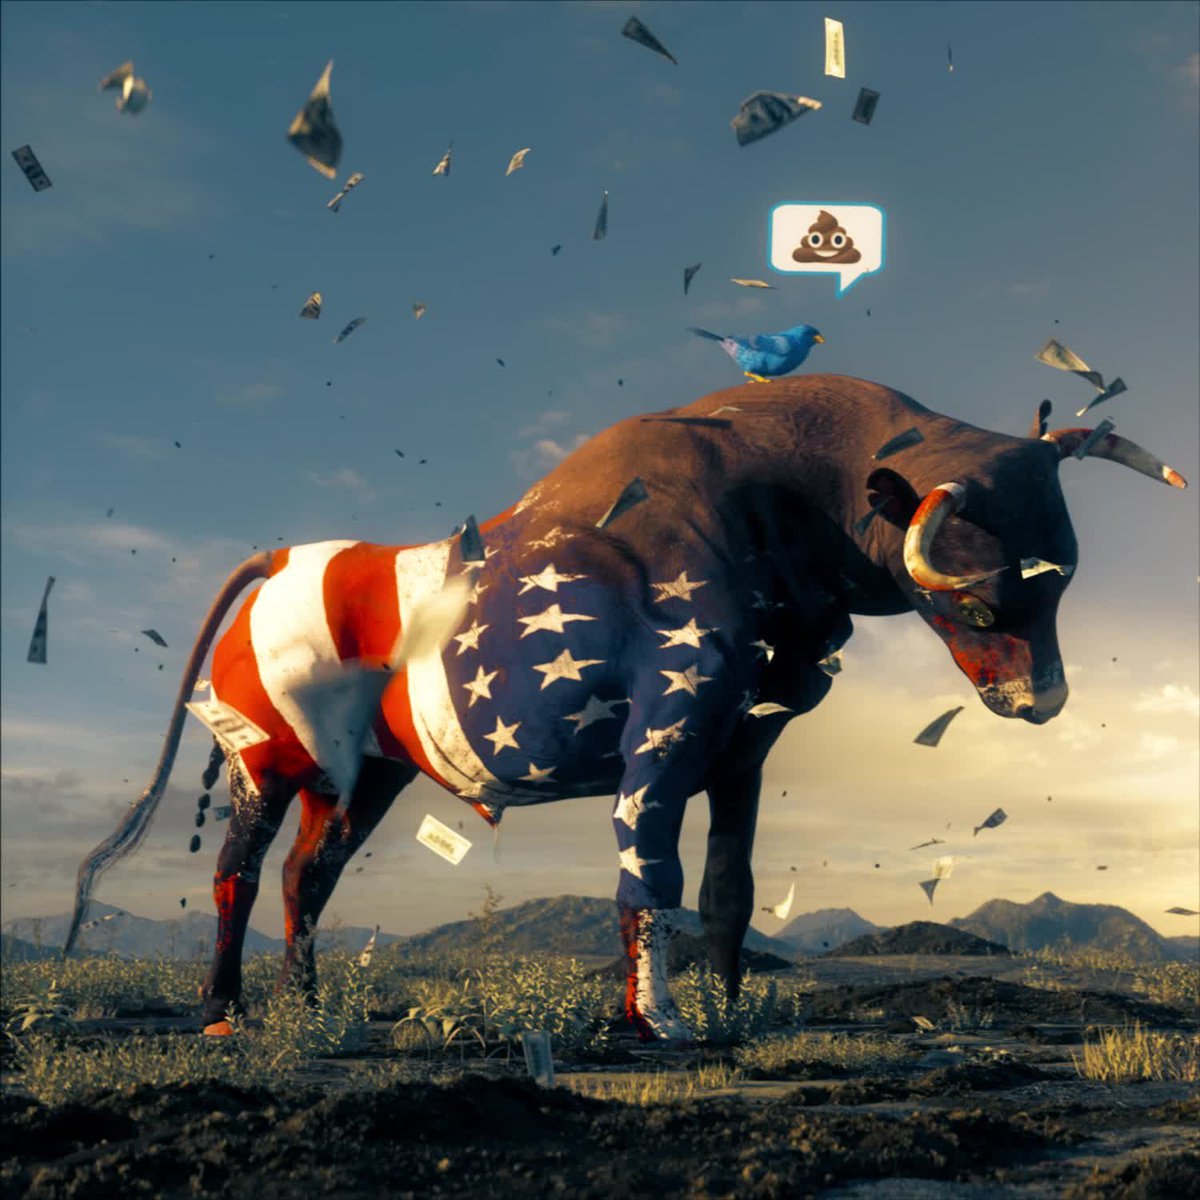 'Politics is Bullshit'...added to TheCultureVault. That completes my series collection of @beeple ! (Im too much of a Boomer to figure out how to share the video file!) BTW - You still haven't figured out how few Beeples there are for sale vs their importance...